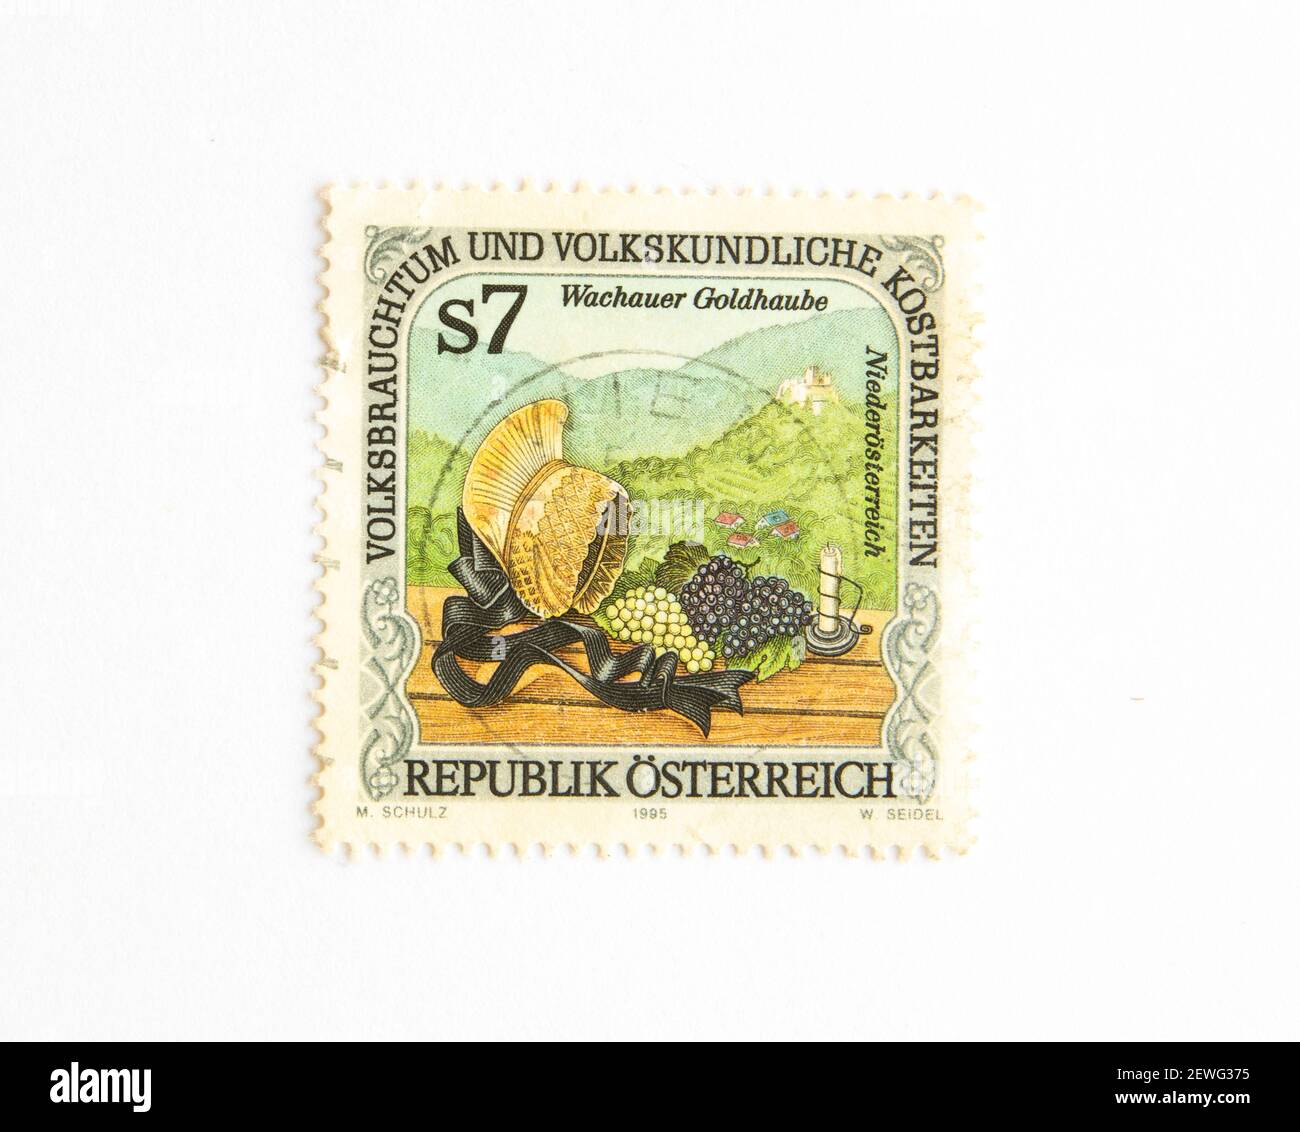 03.03.2021 İstanbul Turkey. Postage Stamp. National Customs and Folklore Treasures: 'Golden Bonnet of the Wachau-Lower Austria' Stock Photo